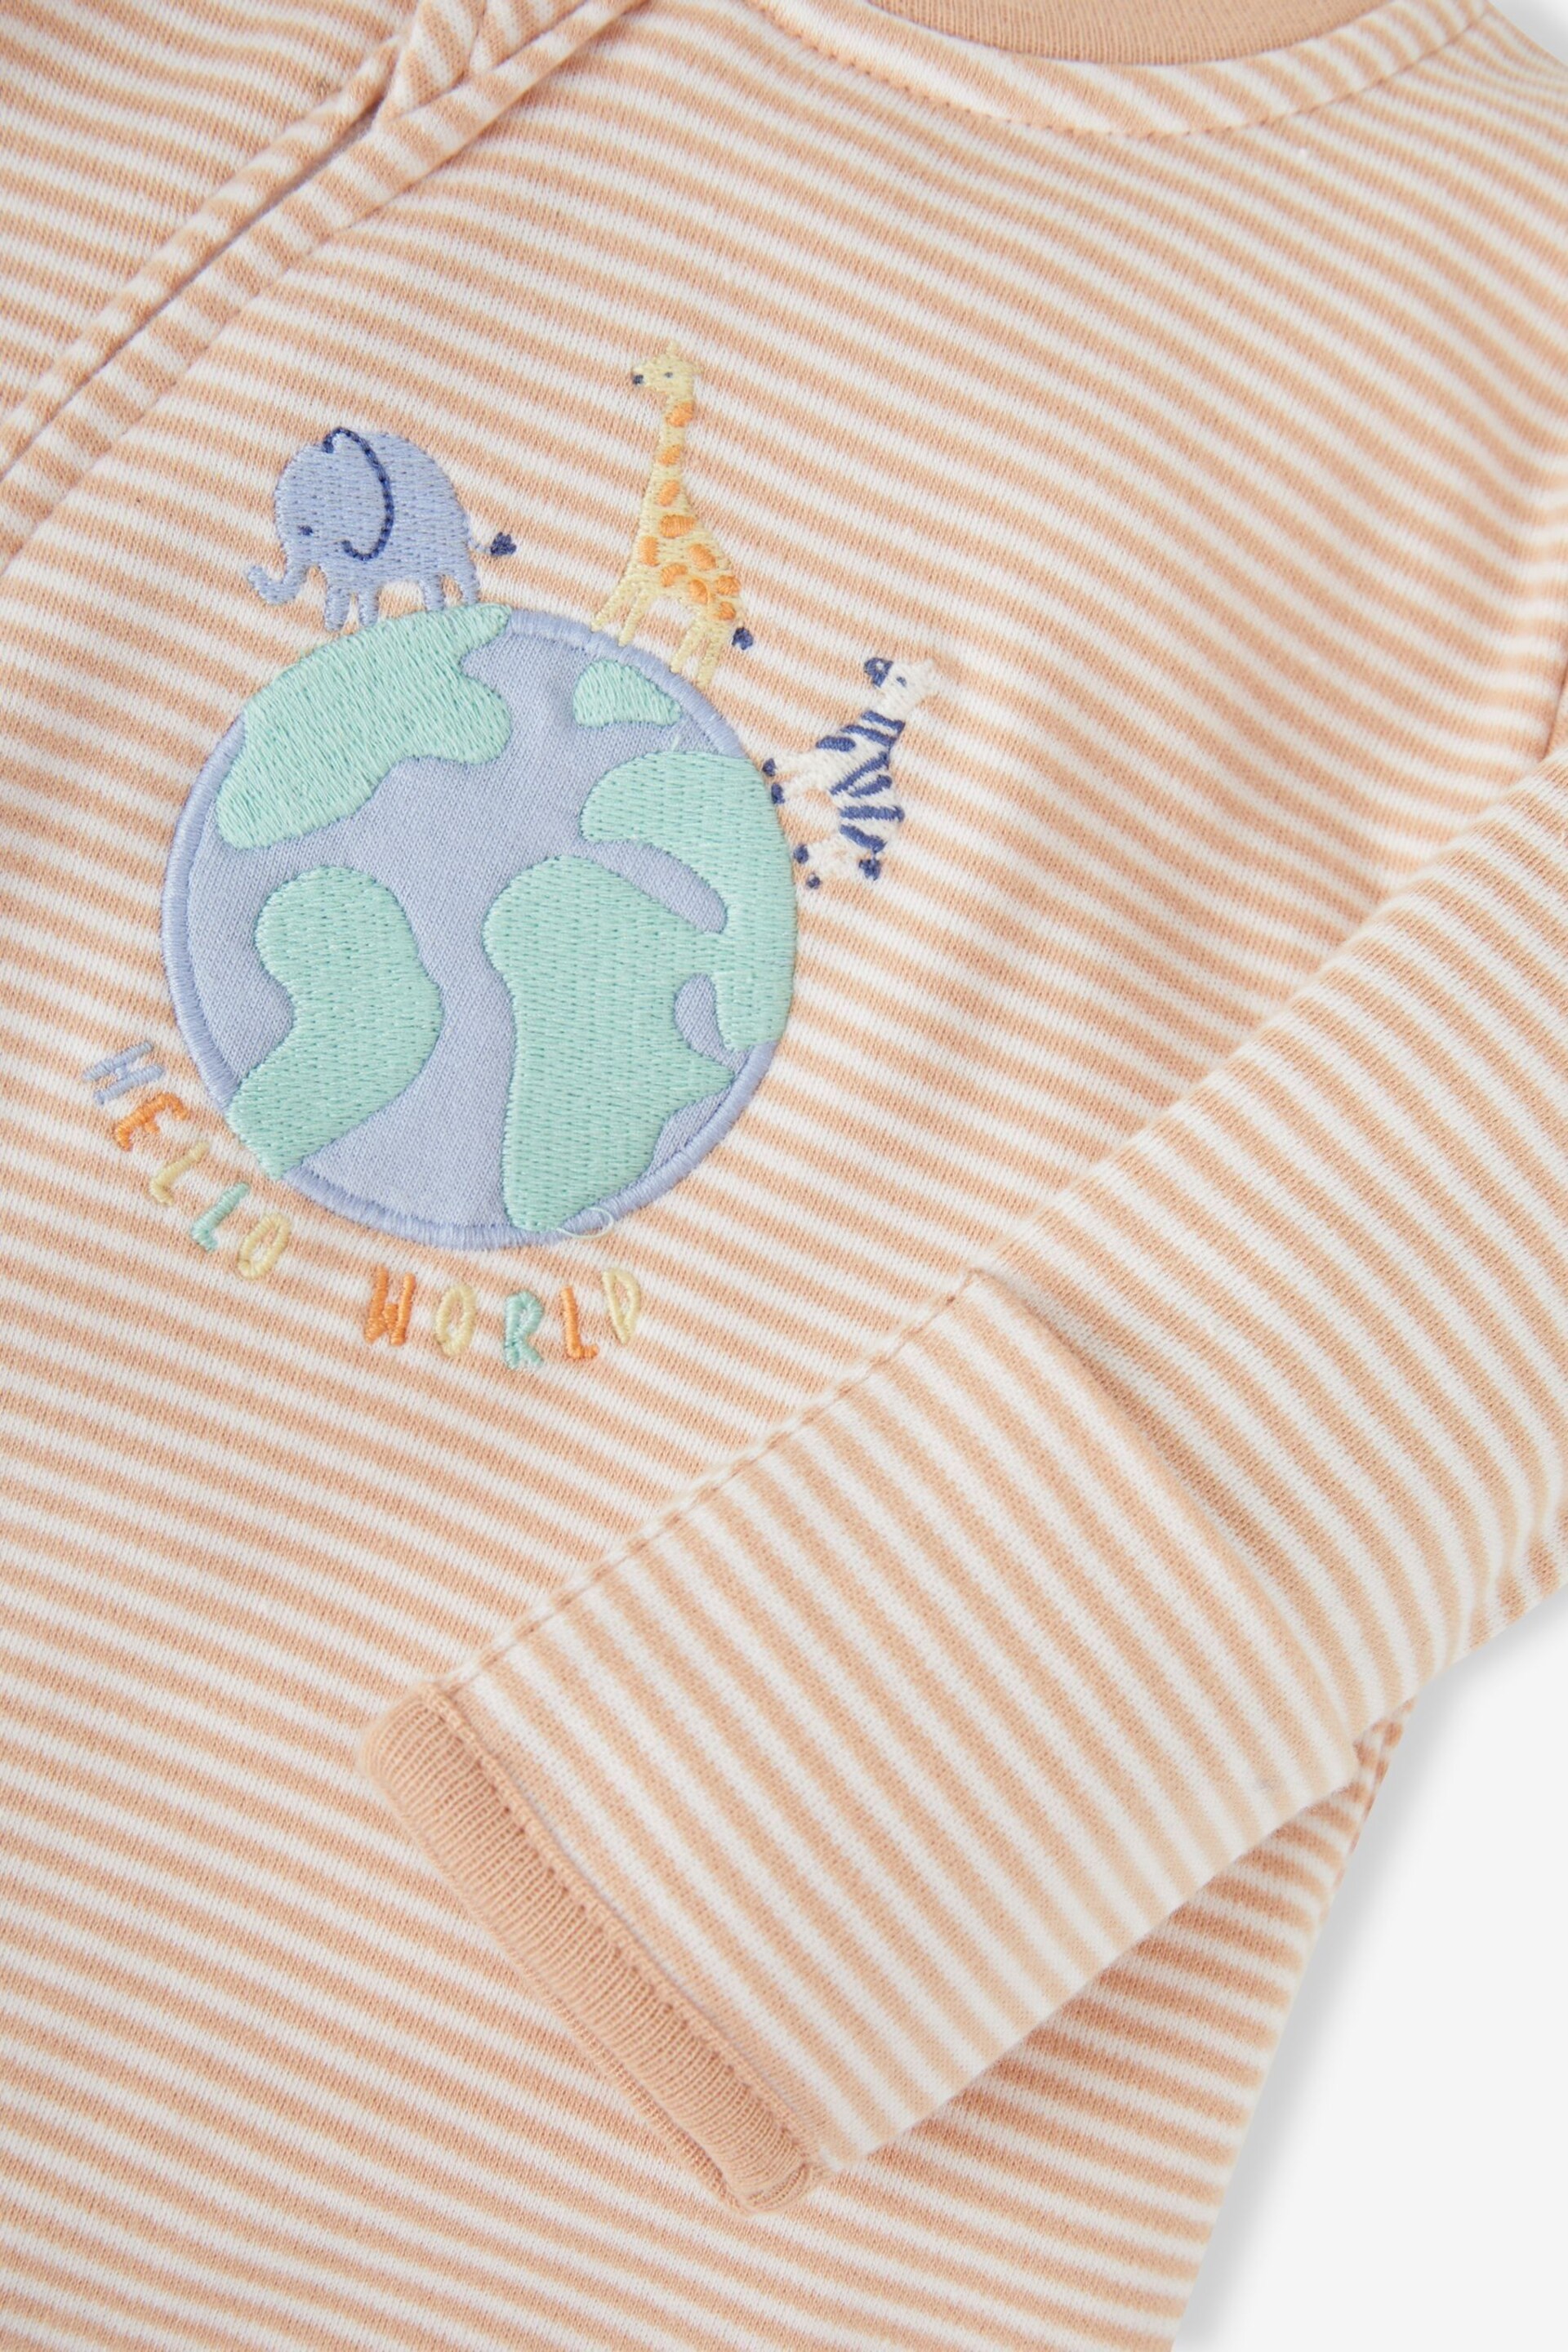 JoJo Maman Bébé Natural Hello World Embroidered Cotton Zip Baby Sleepsuit - Image 3 of 3